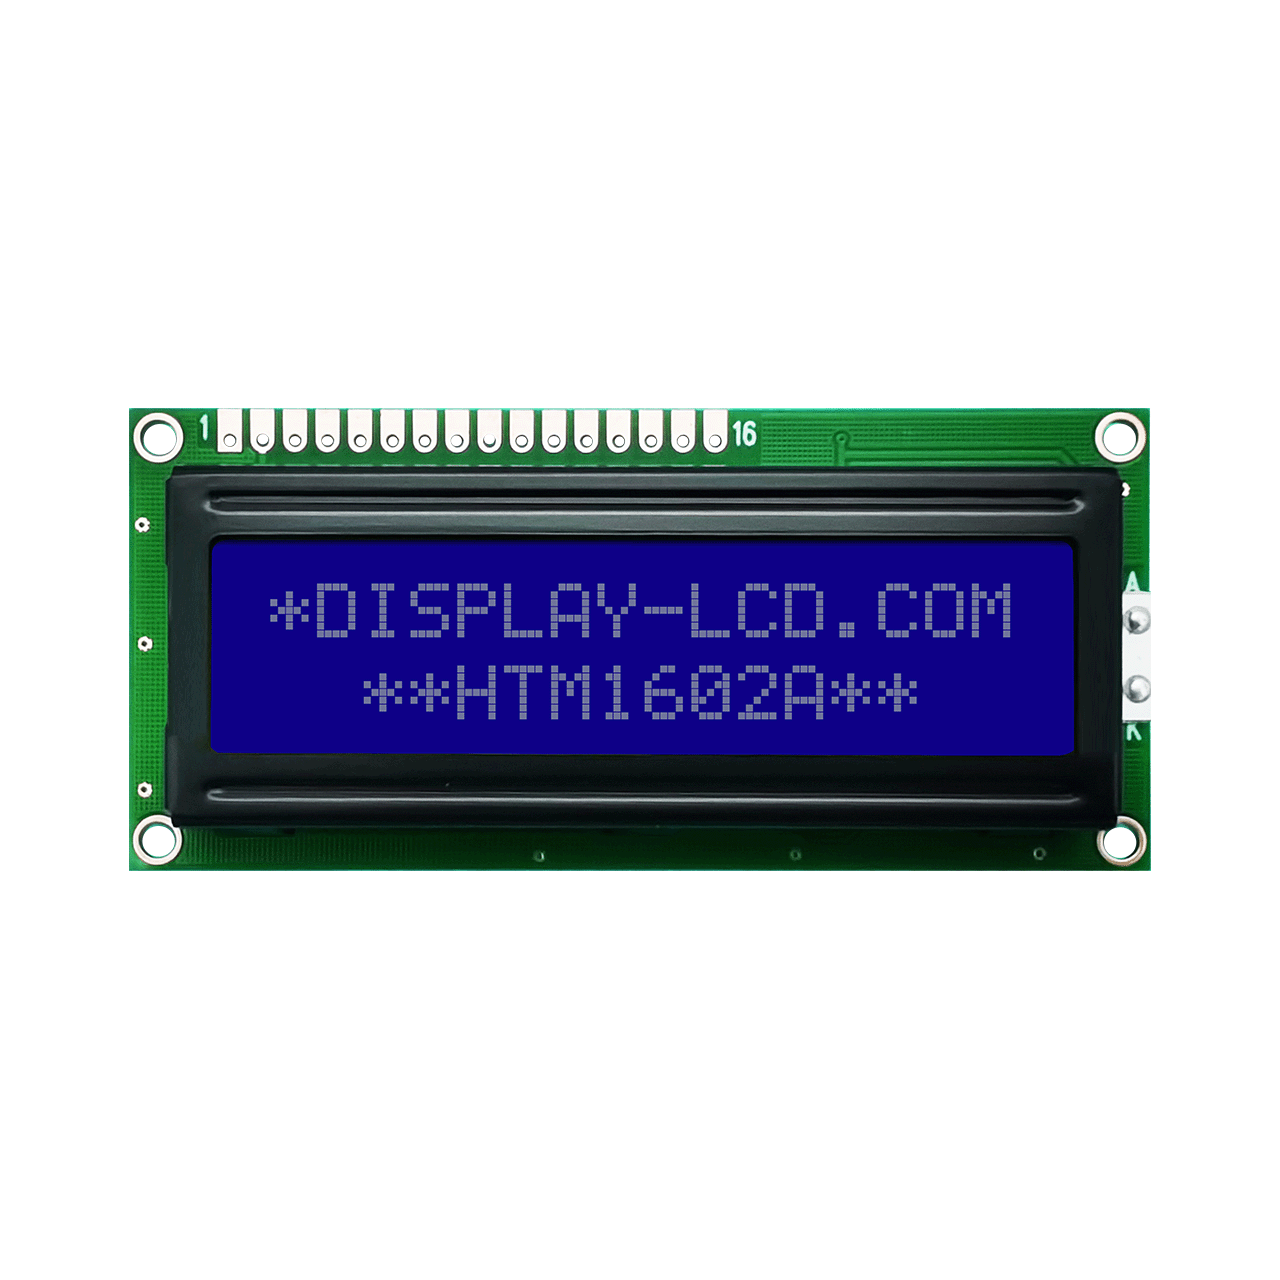 2X16 Character STN- Blue LCD Module Display with White Side Backlight 5.0V-Arduino